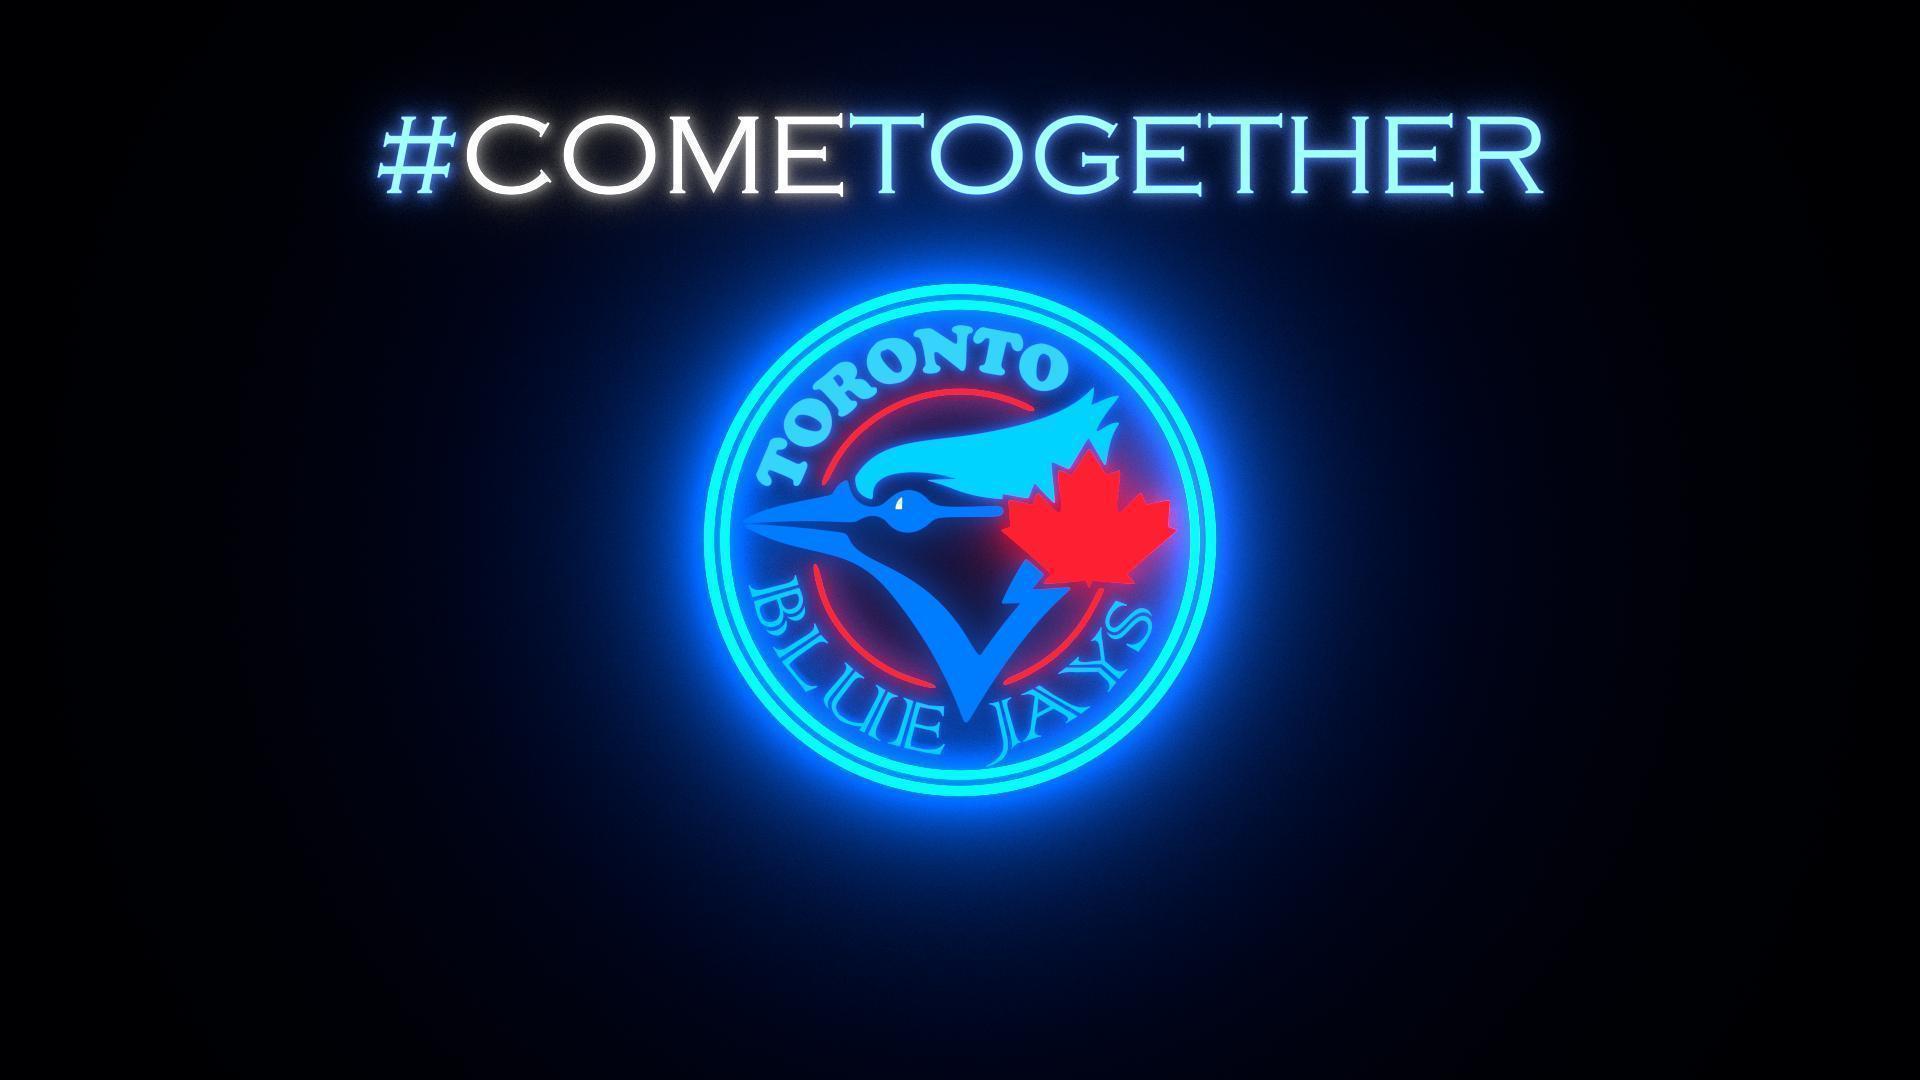 Toronto Blue Jays wallpaper HD background download Facebook Covers